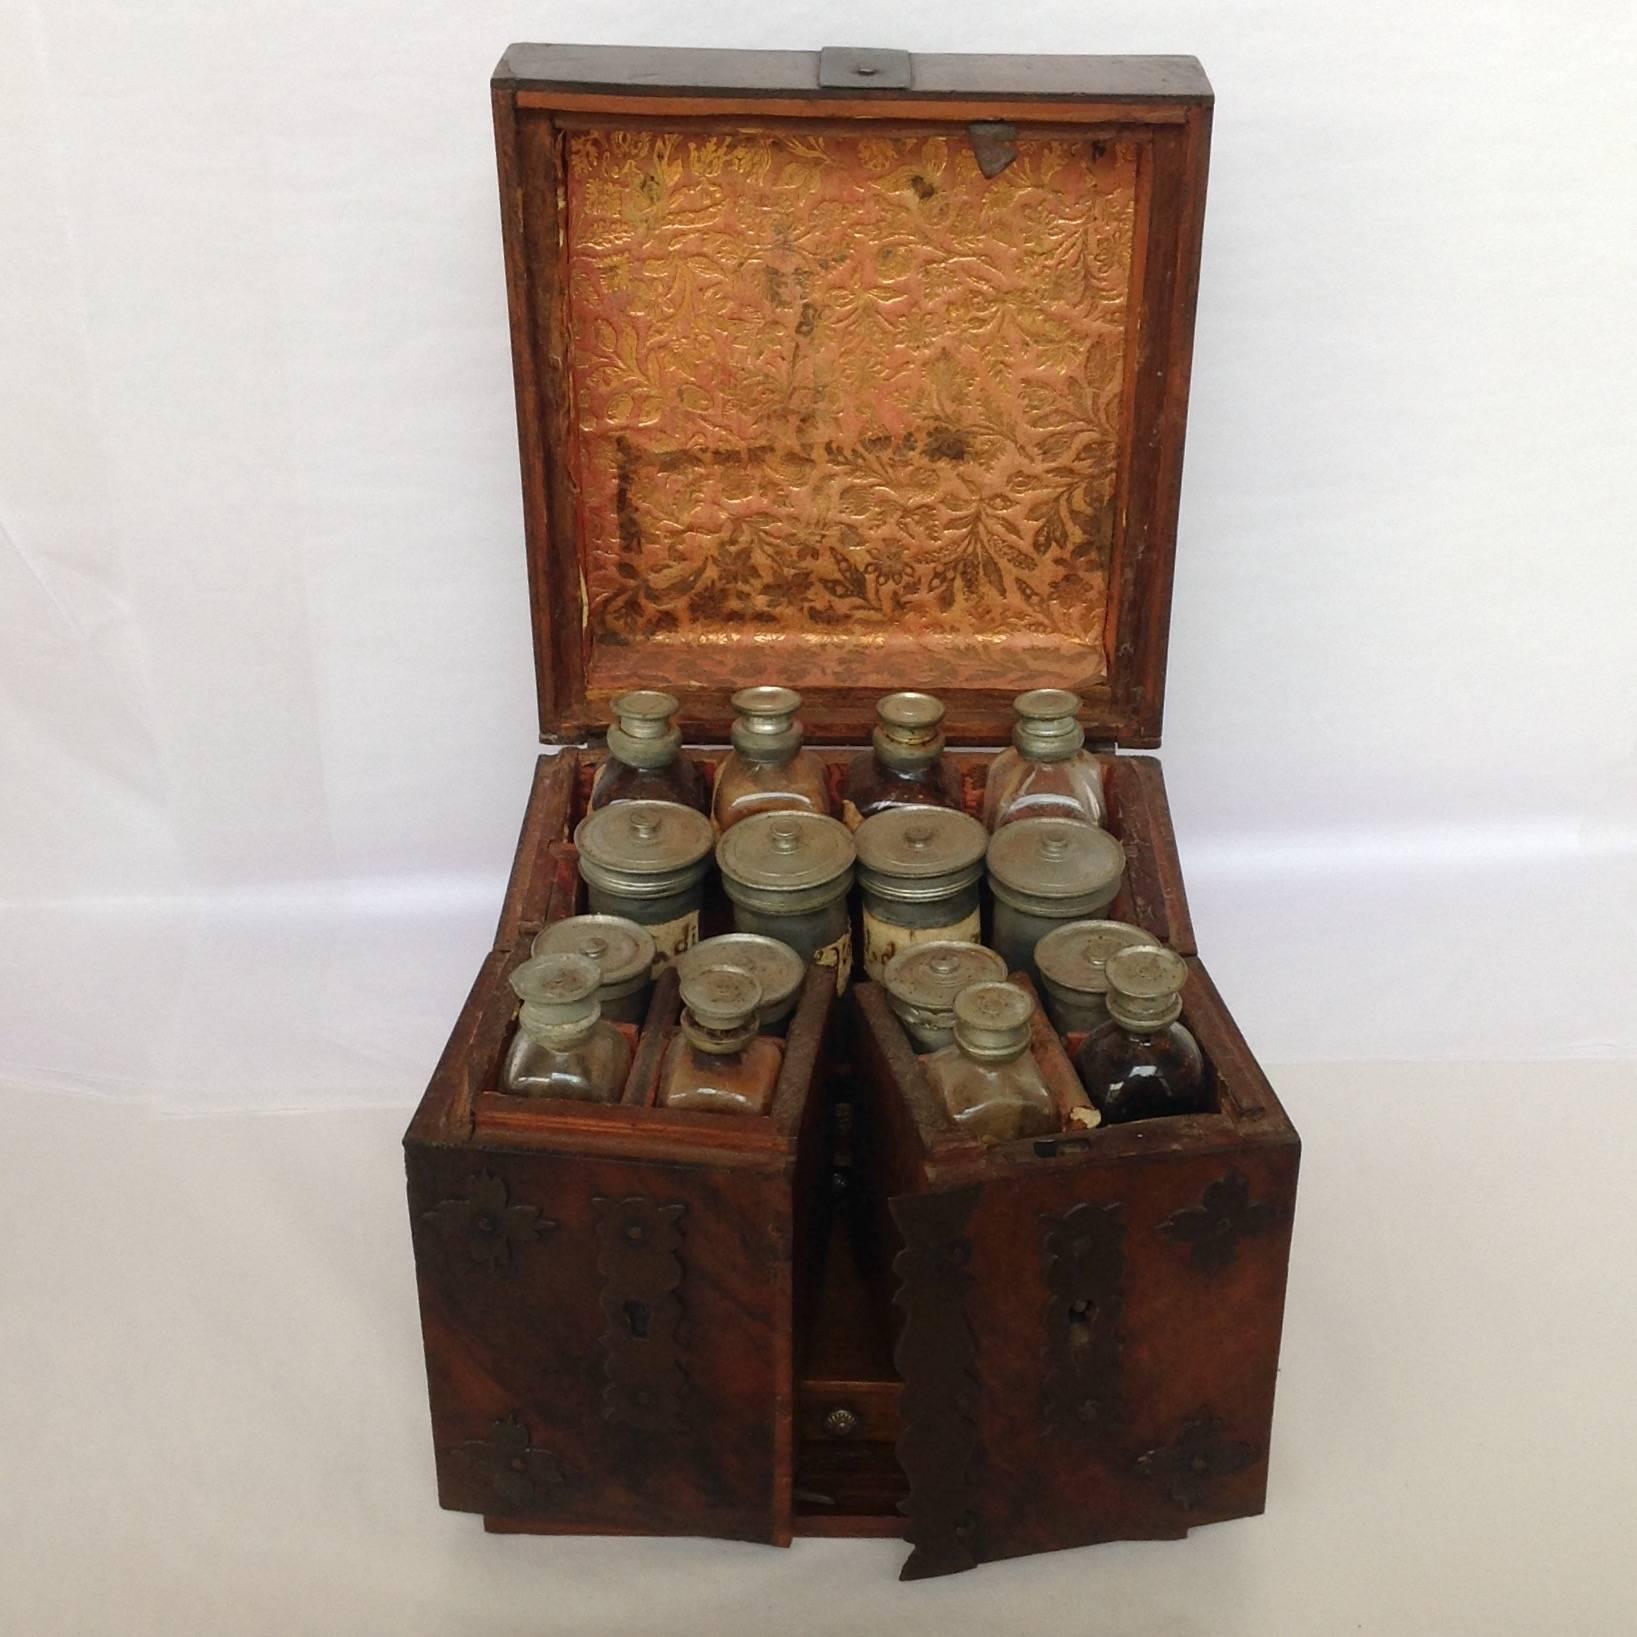 Portable Dutch Apothecary cabinet with a burled walnut self-locking case. The lid lift and the side cabinets swig out. There are small drawers in each cabinet with unidentified black specimens. There are eight original glass bottles with pewter tops